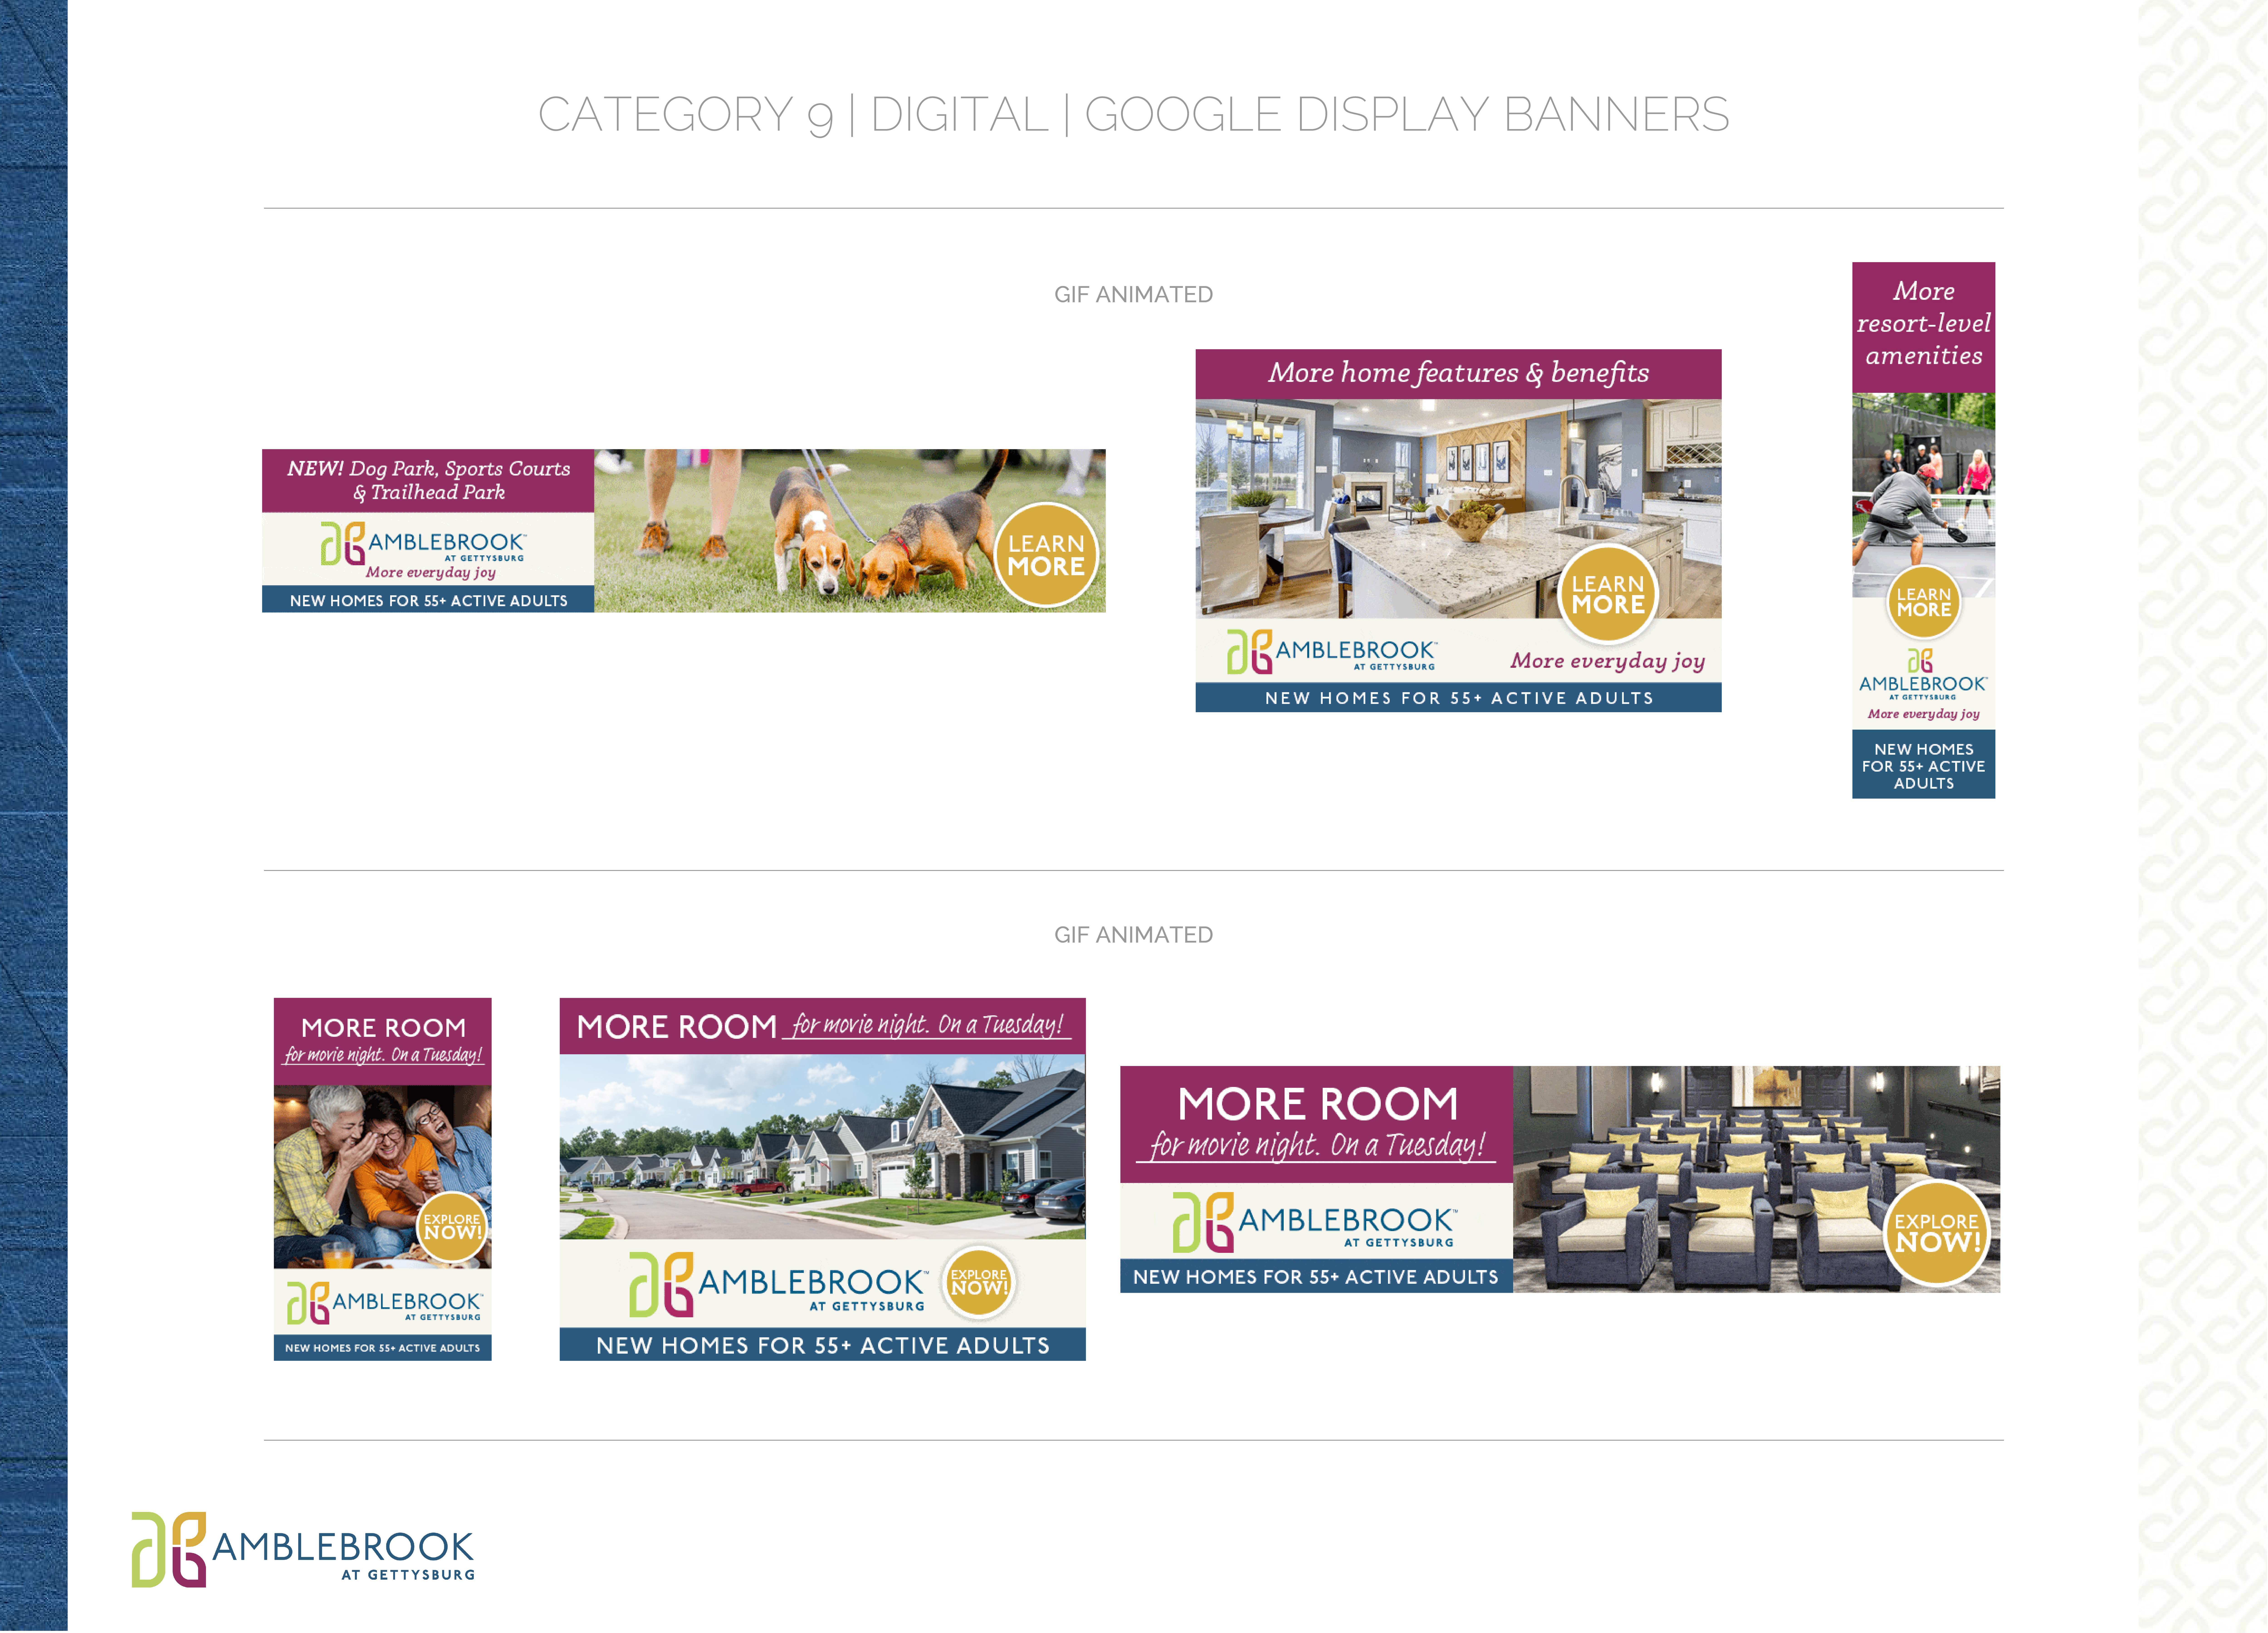 Examples of award-winning SmartTouch Interactive display banner creative assets.